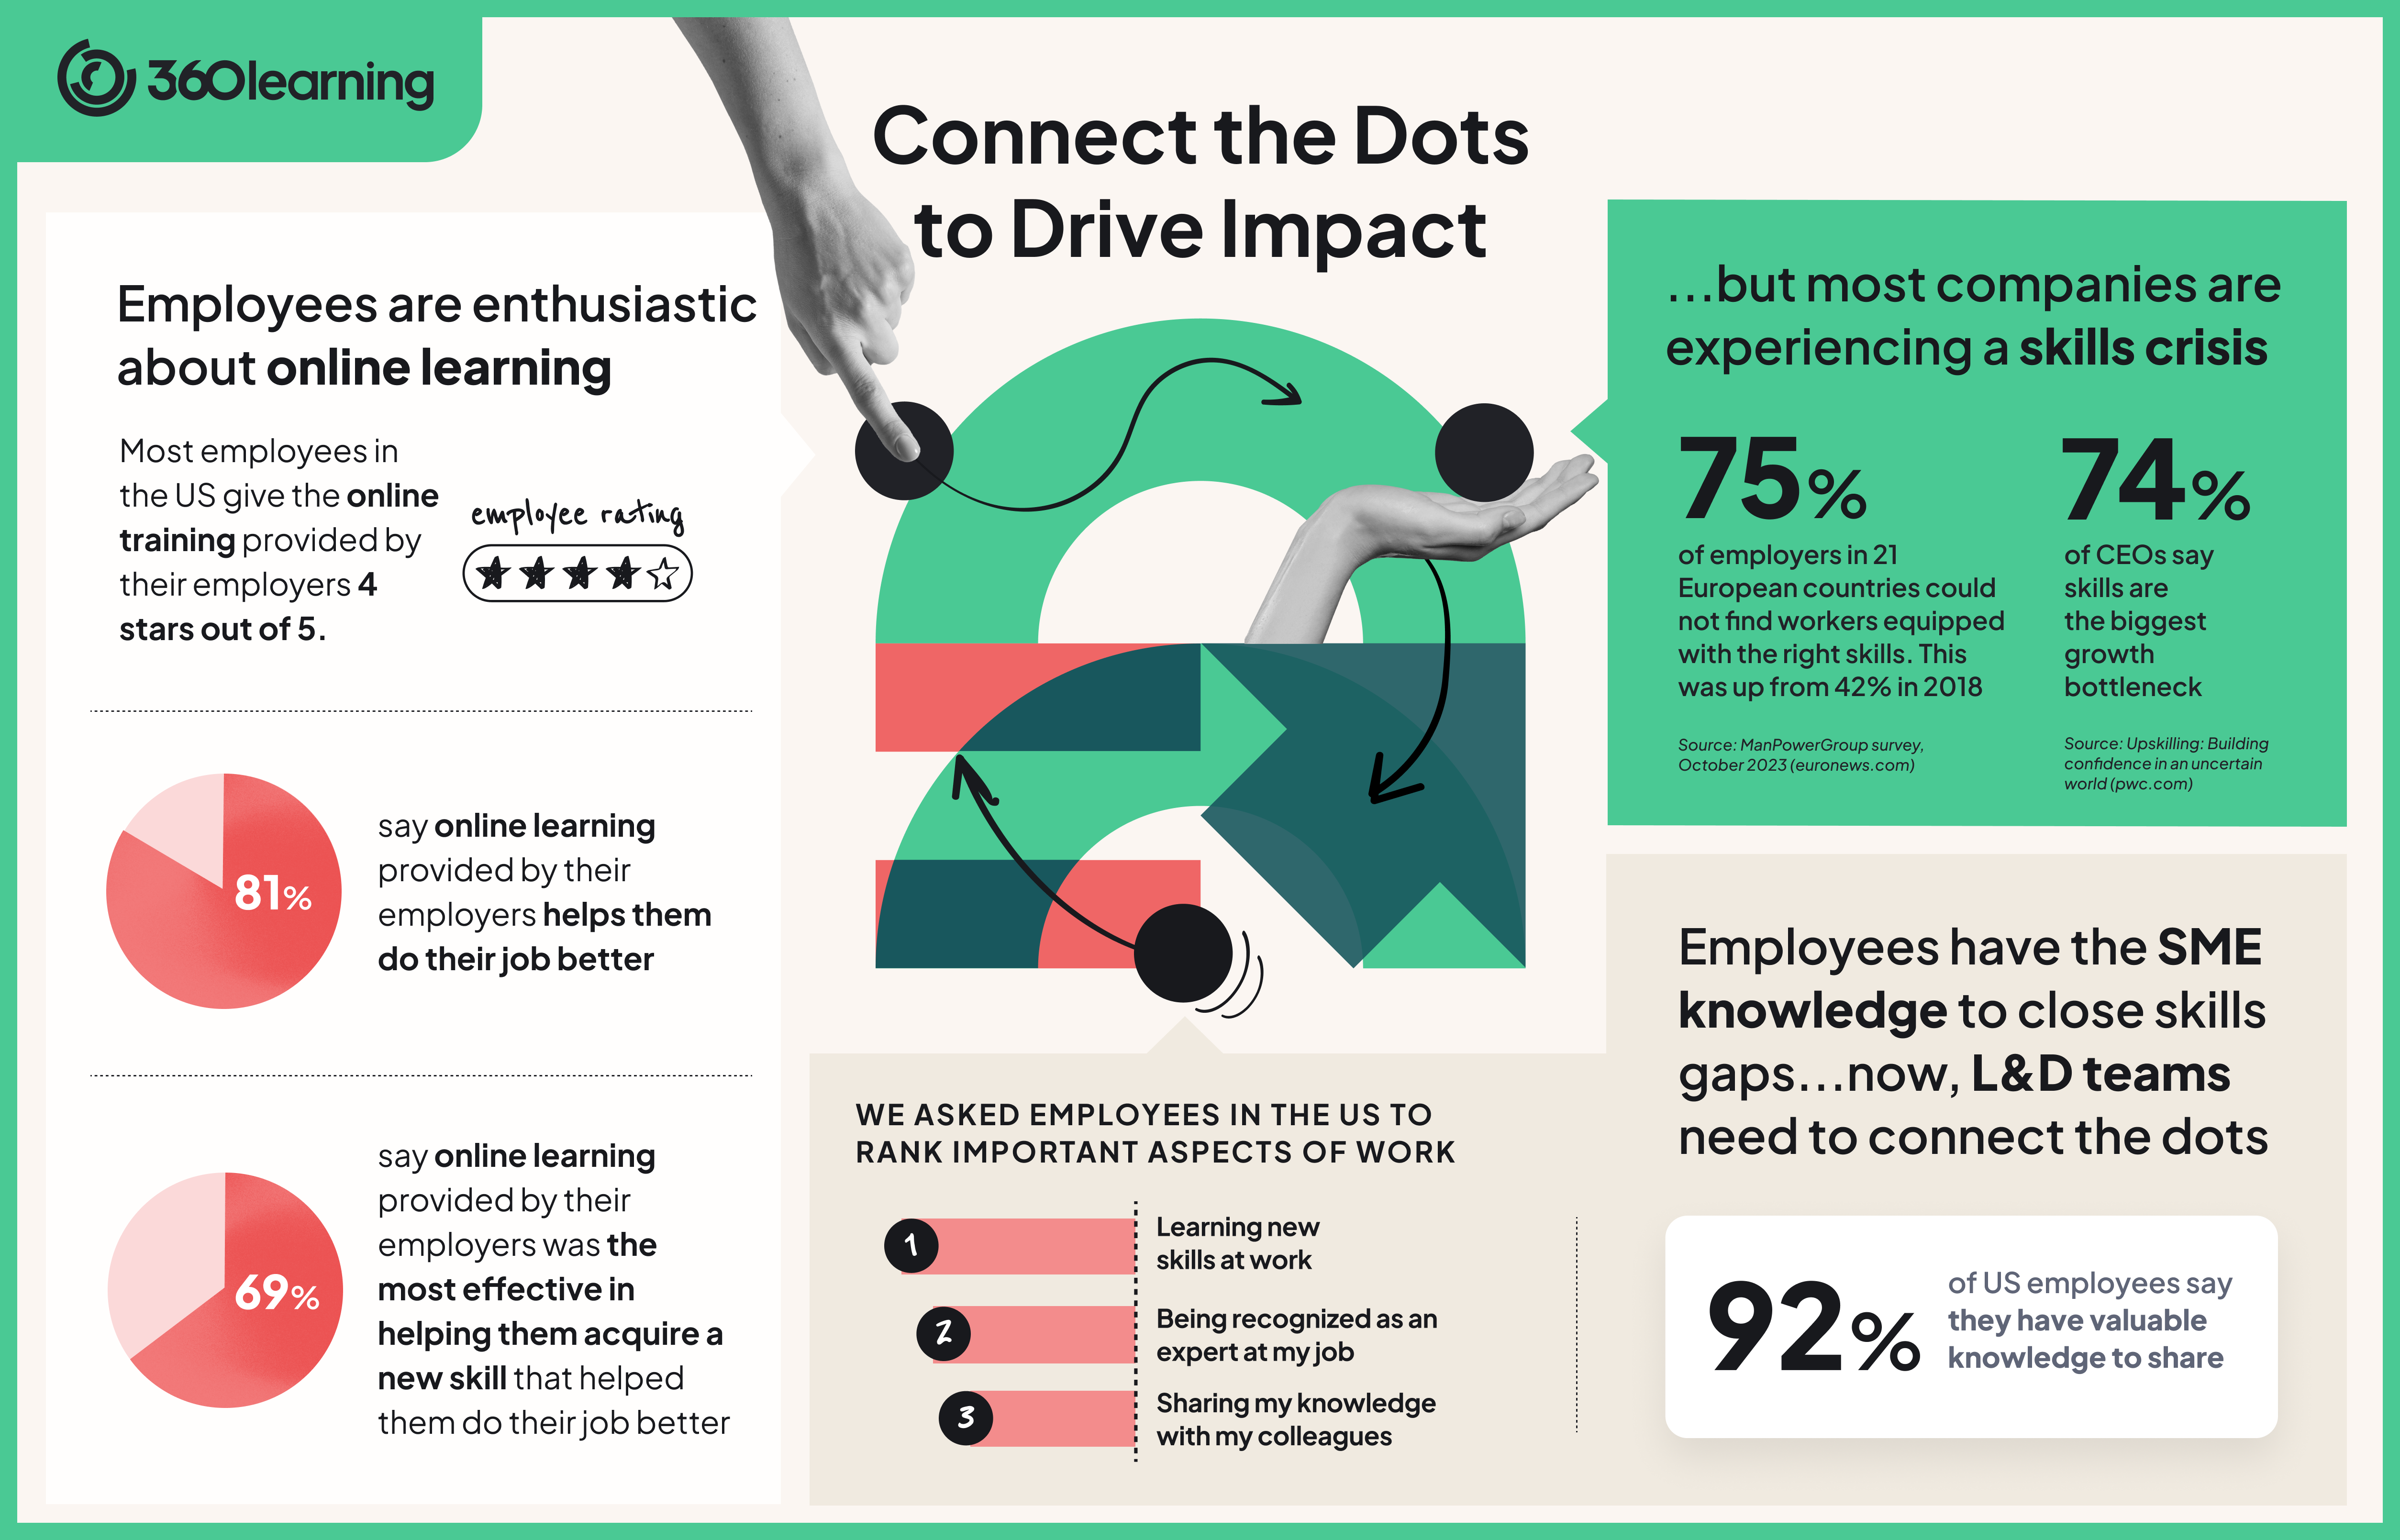 It's time for L&D to connect the dots to drive impact